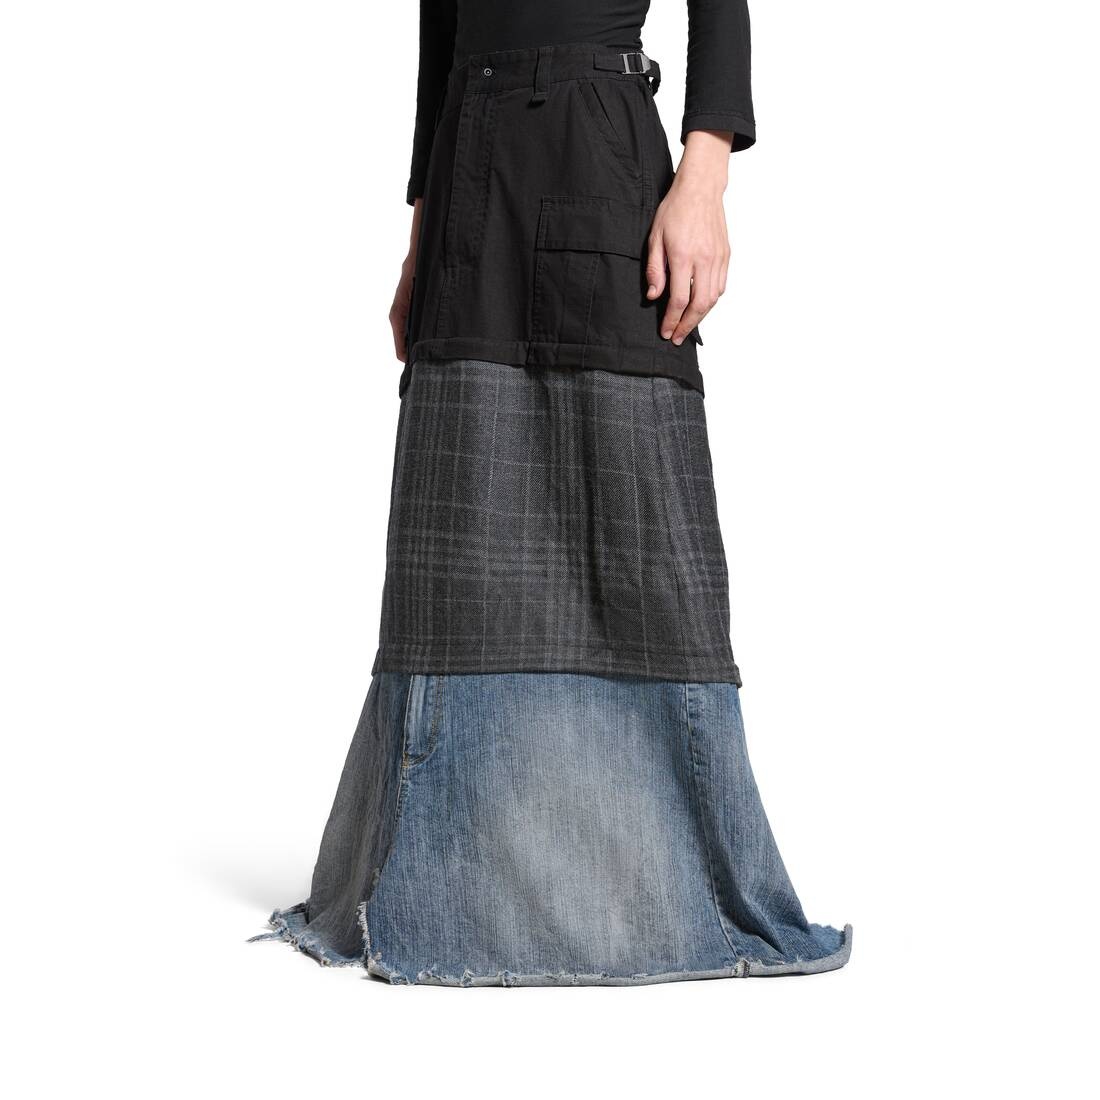 Women's Maxi Layered Cargo Skirt in Multicolored - 5